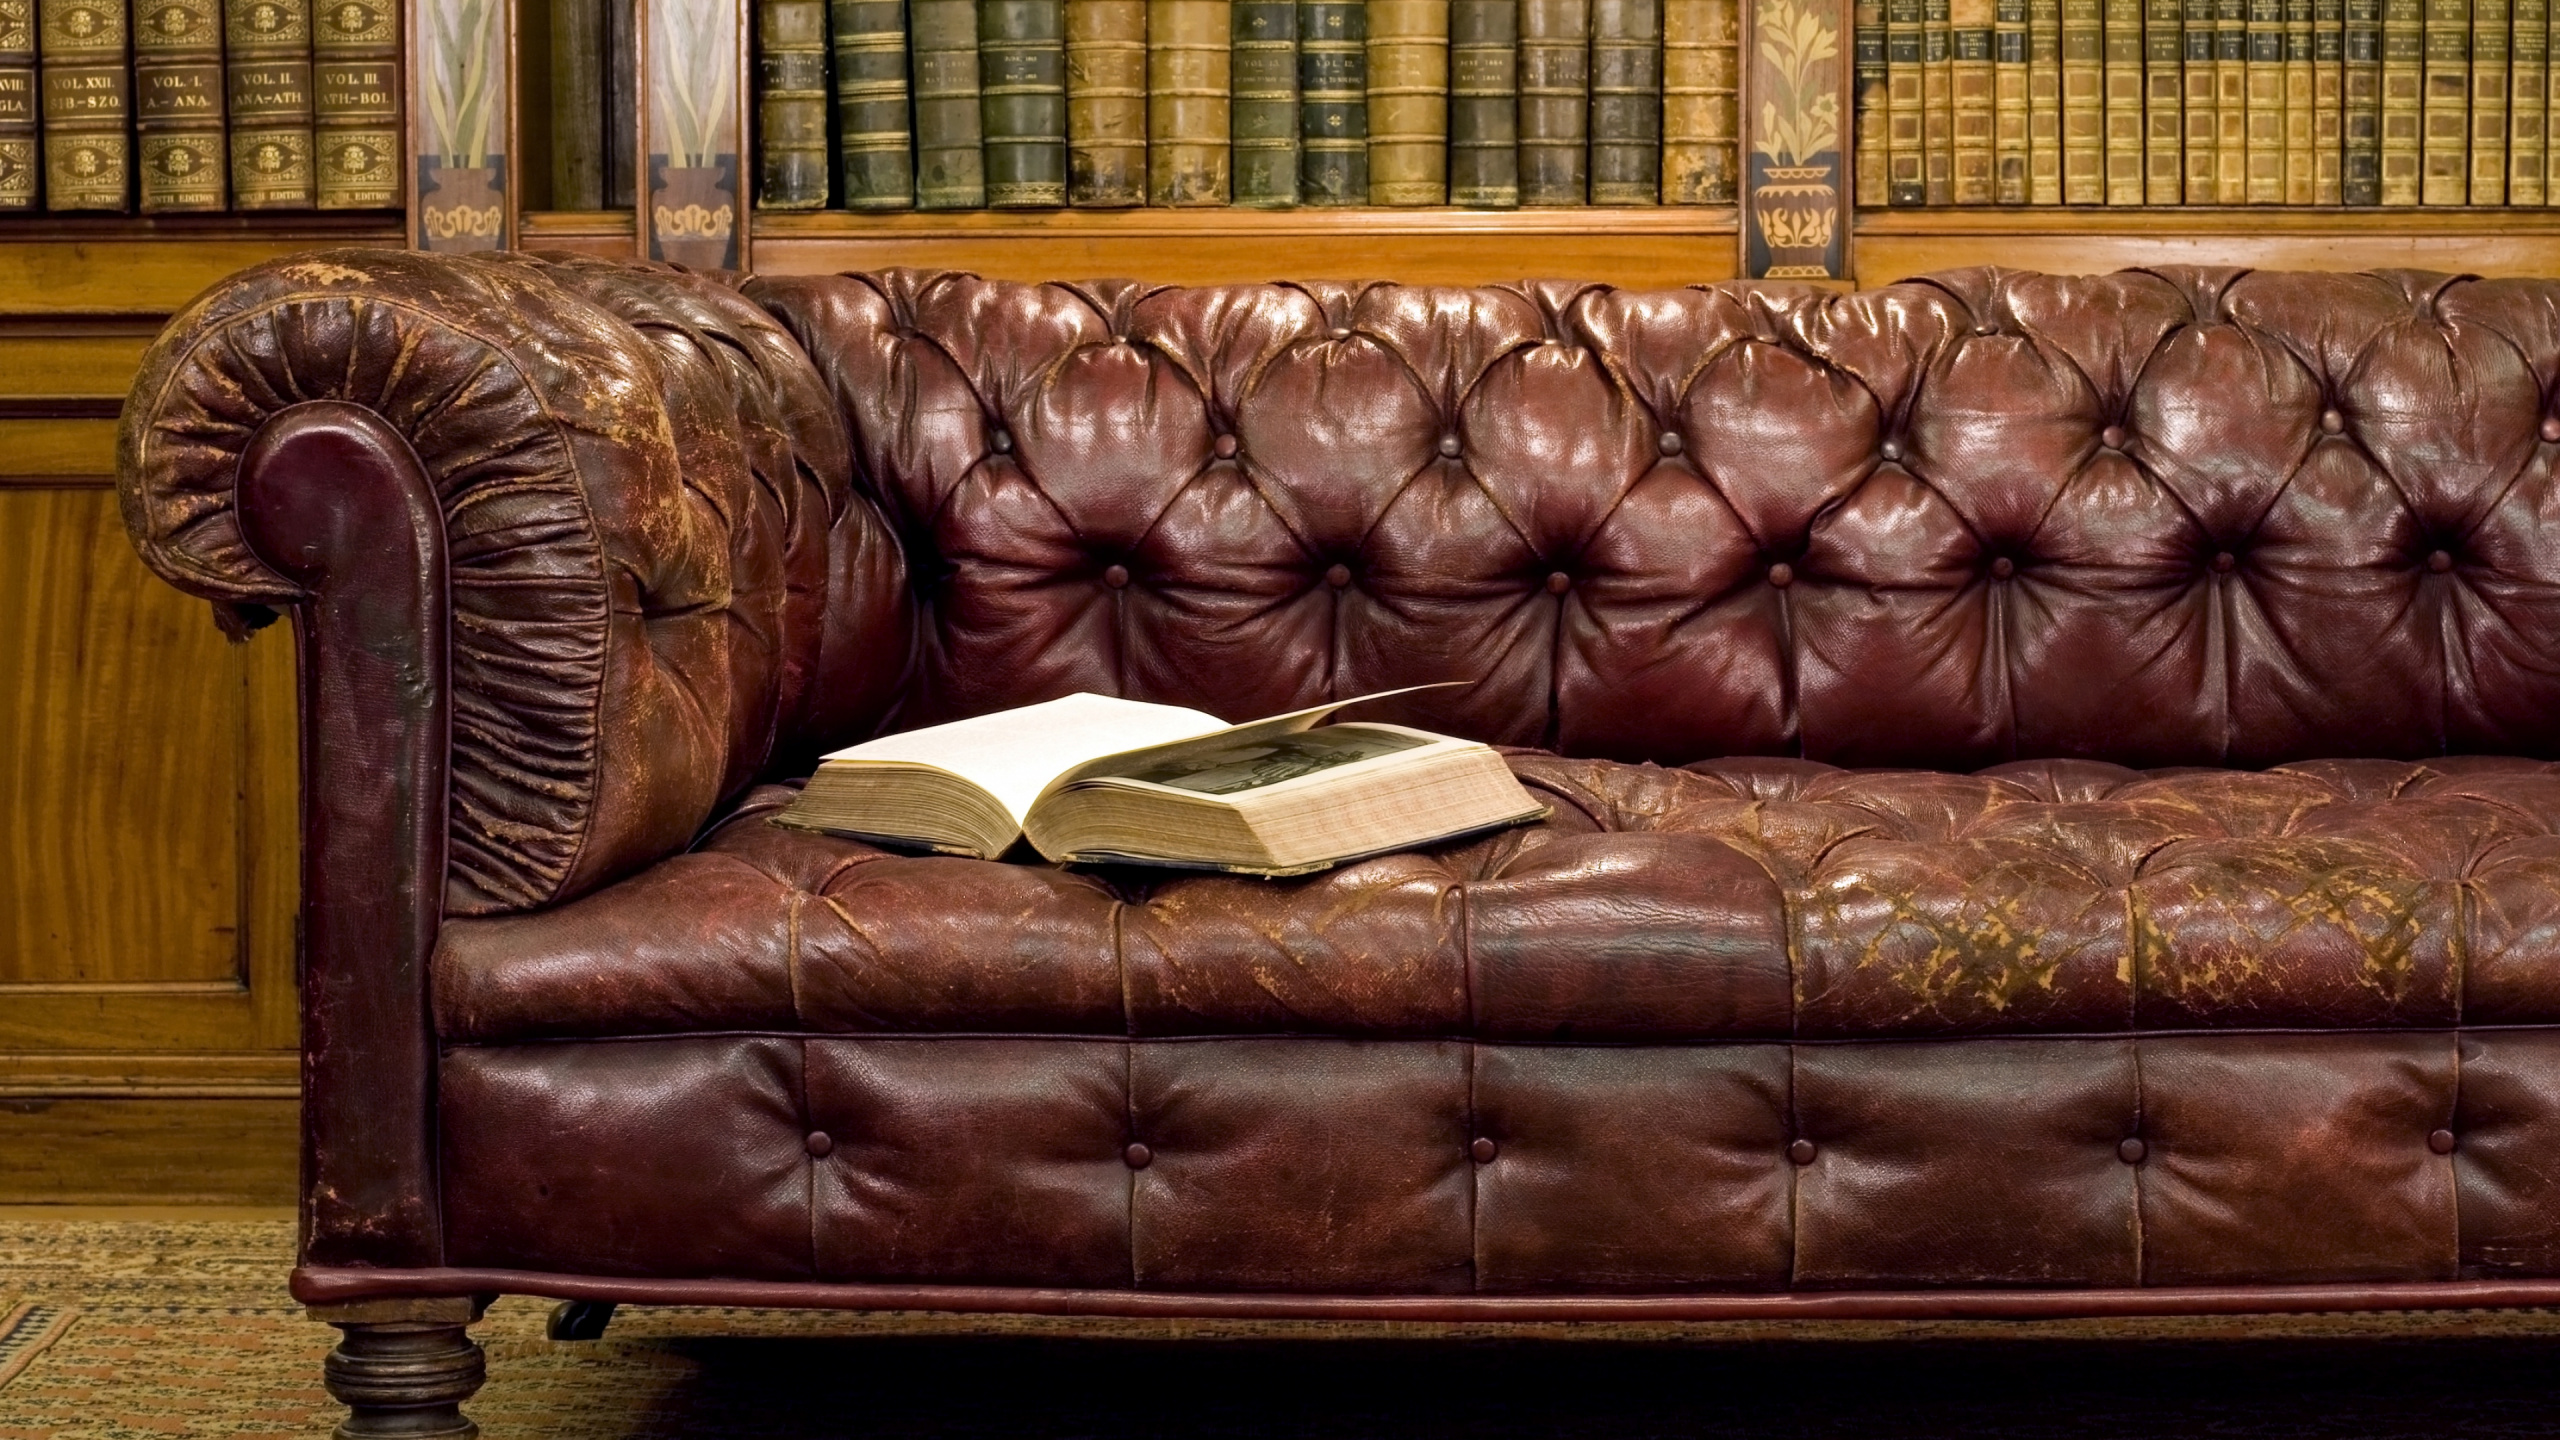 White Book on Brown Leather Couch. Wallpaper in 2560x1440 Resolution